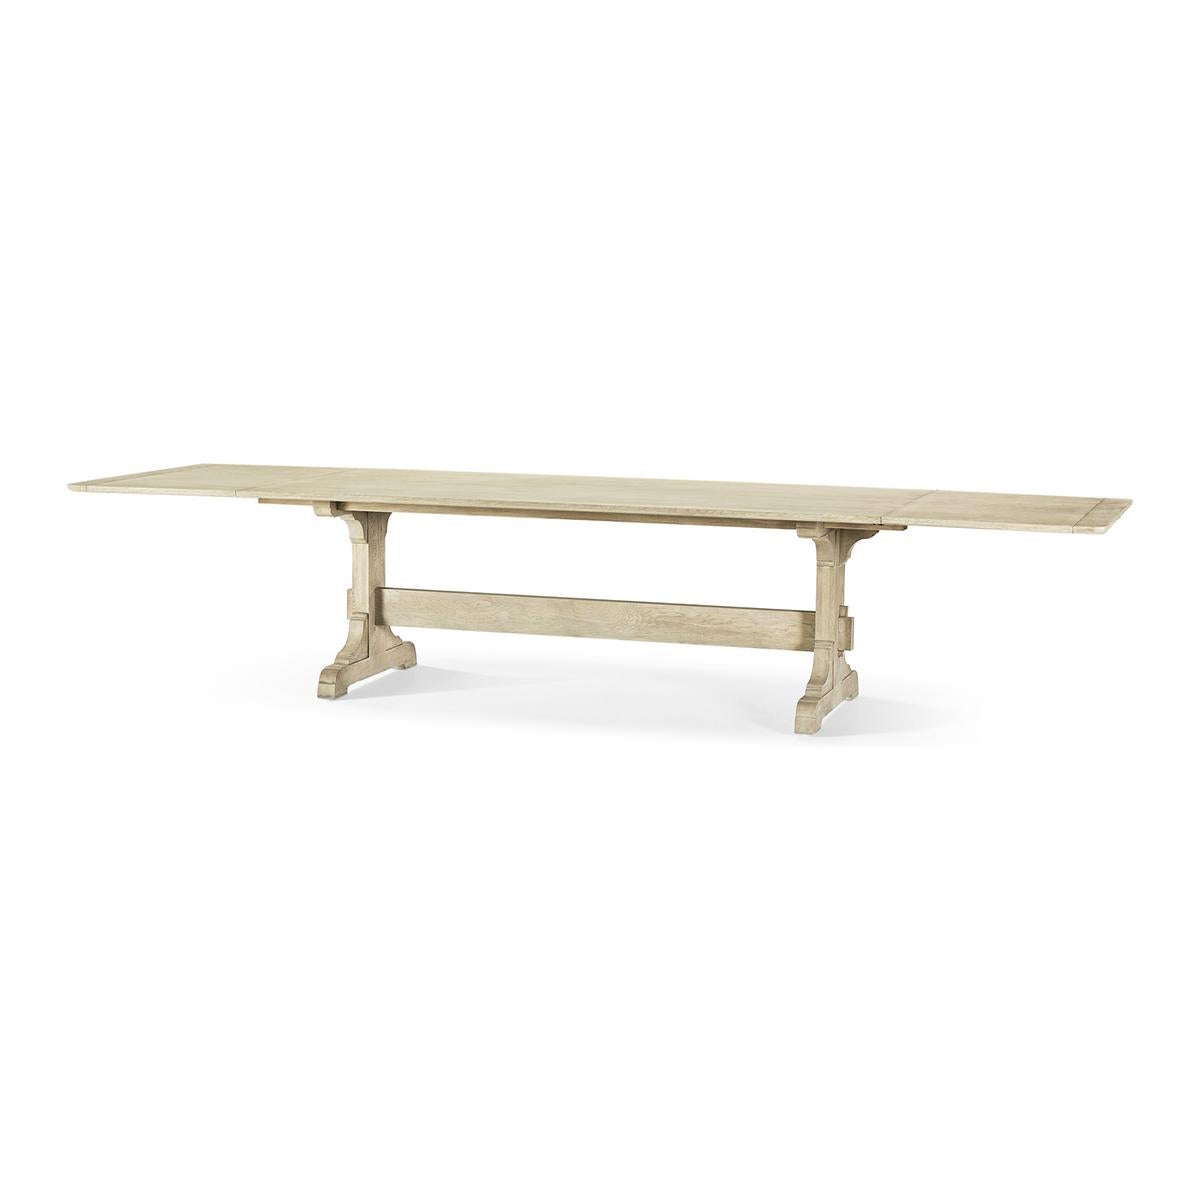 Light European trestle end dining table, this extension table opens to 148